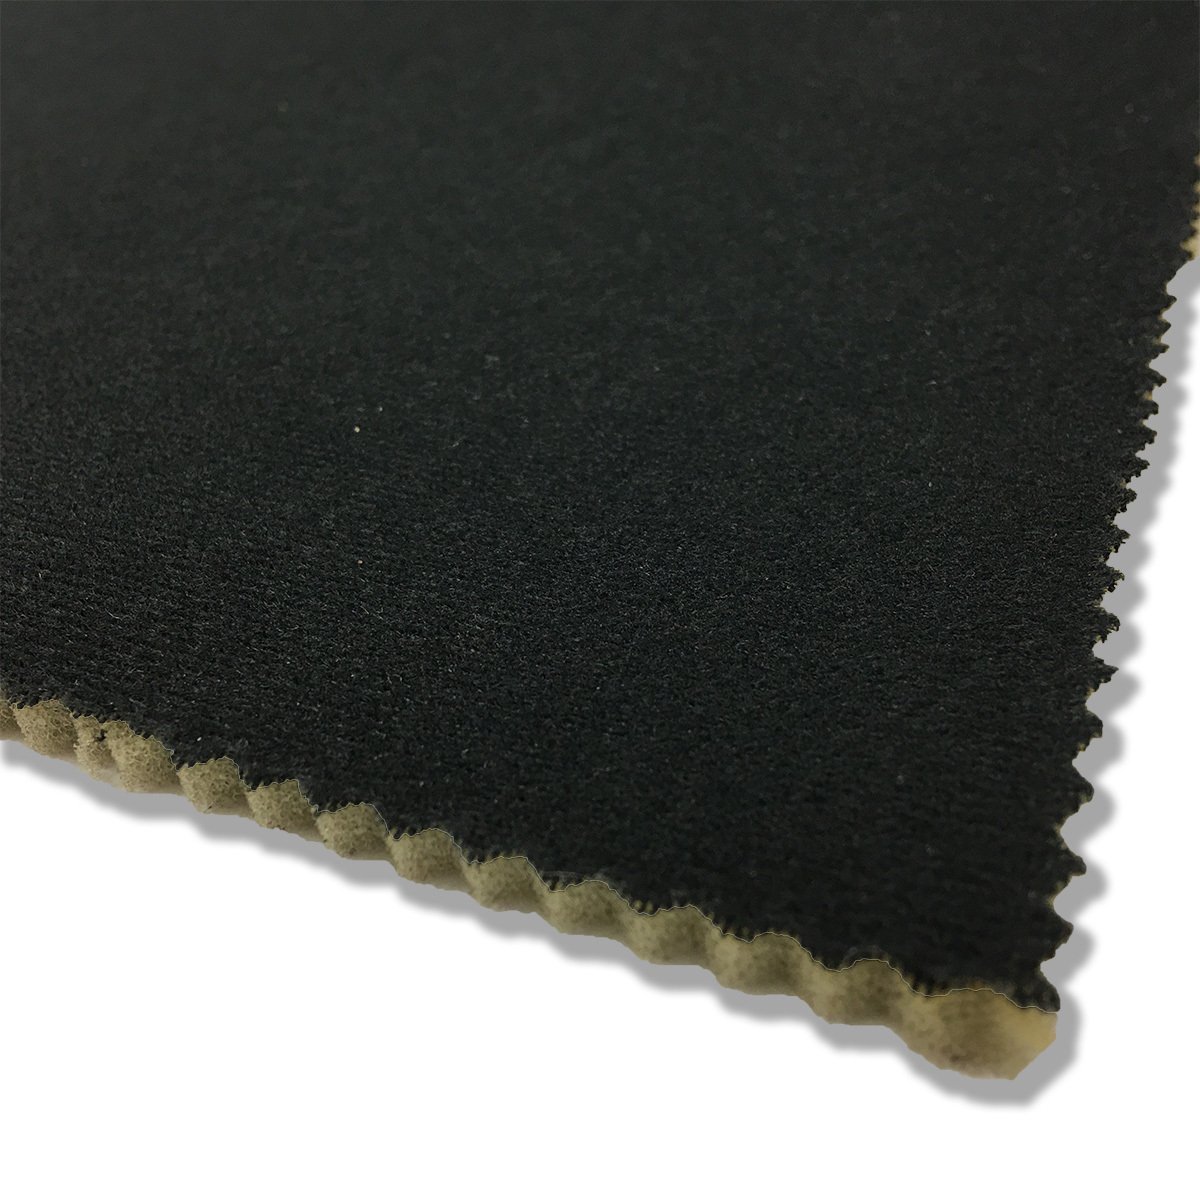 [CI] fireproof automobile ceiling . for urethane foam [ black ][ thickness 5mm][ width 150cm] ceiling sause - ceiling ..- trim re-covering - slack - roof lining 